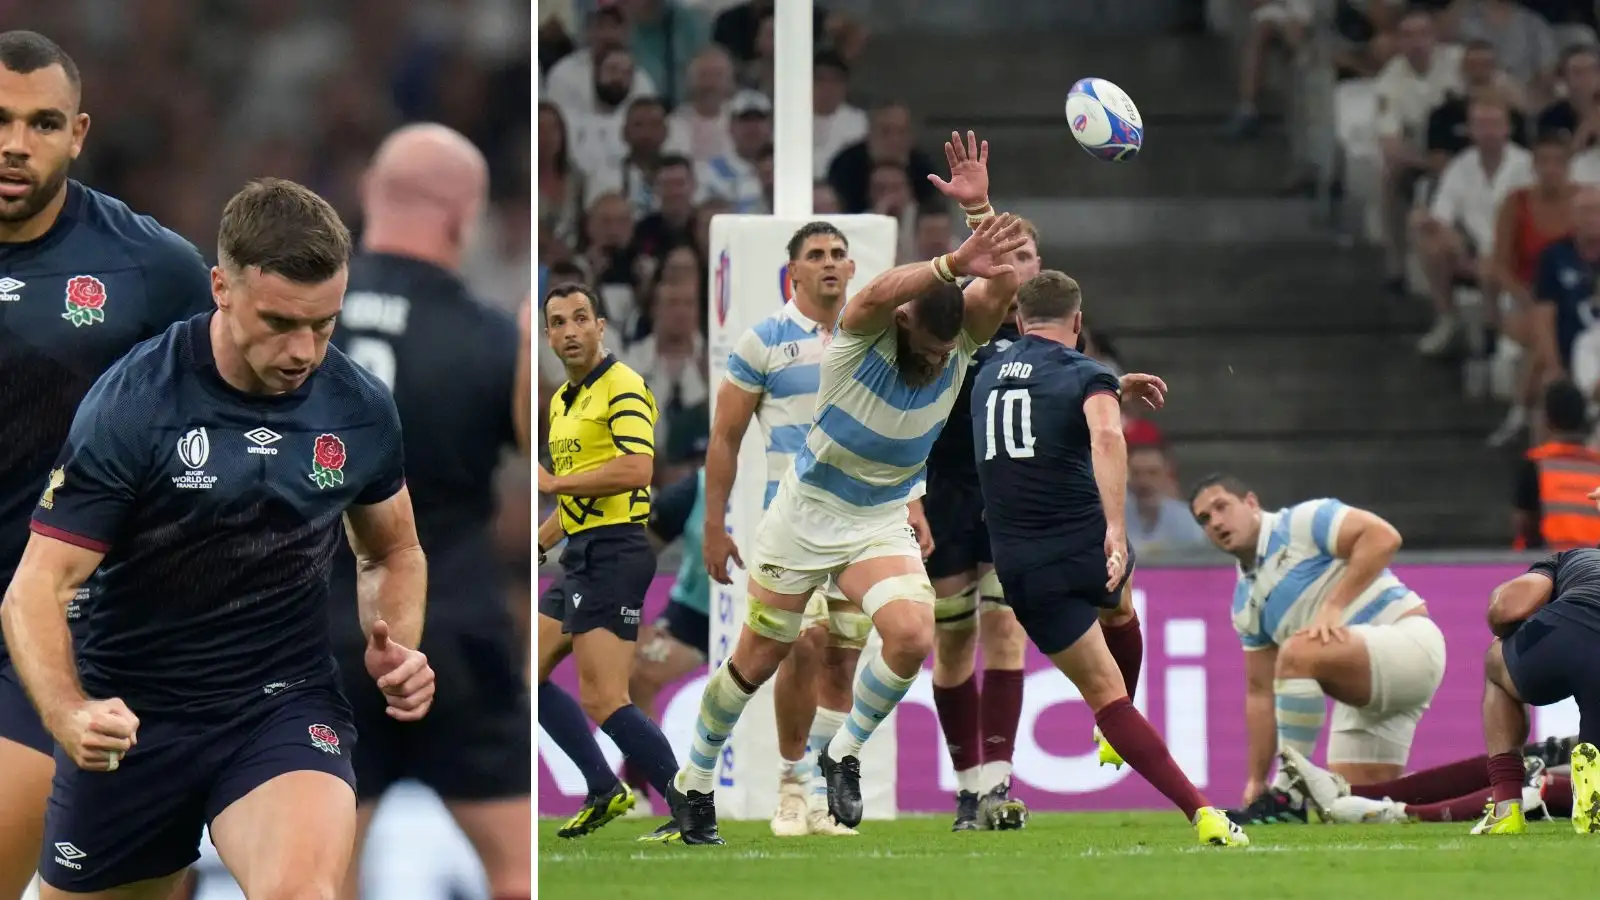 England's George Ford scores a drop goal during the Rugby World Cup Pool D match between England and Argentina in the Stade de Marseille